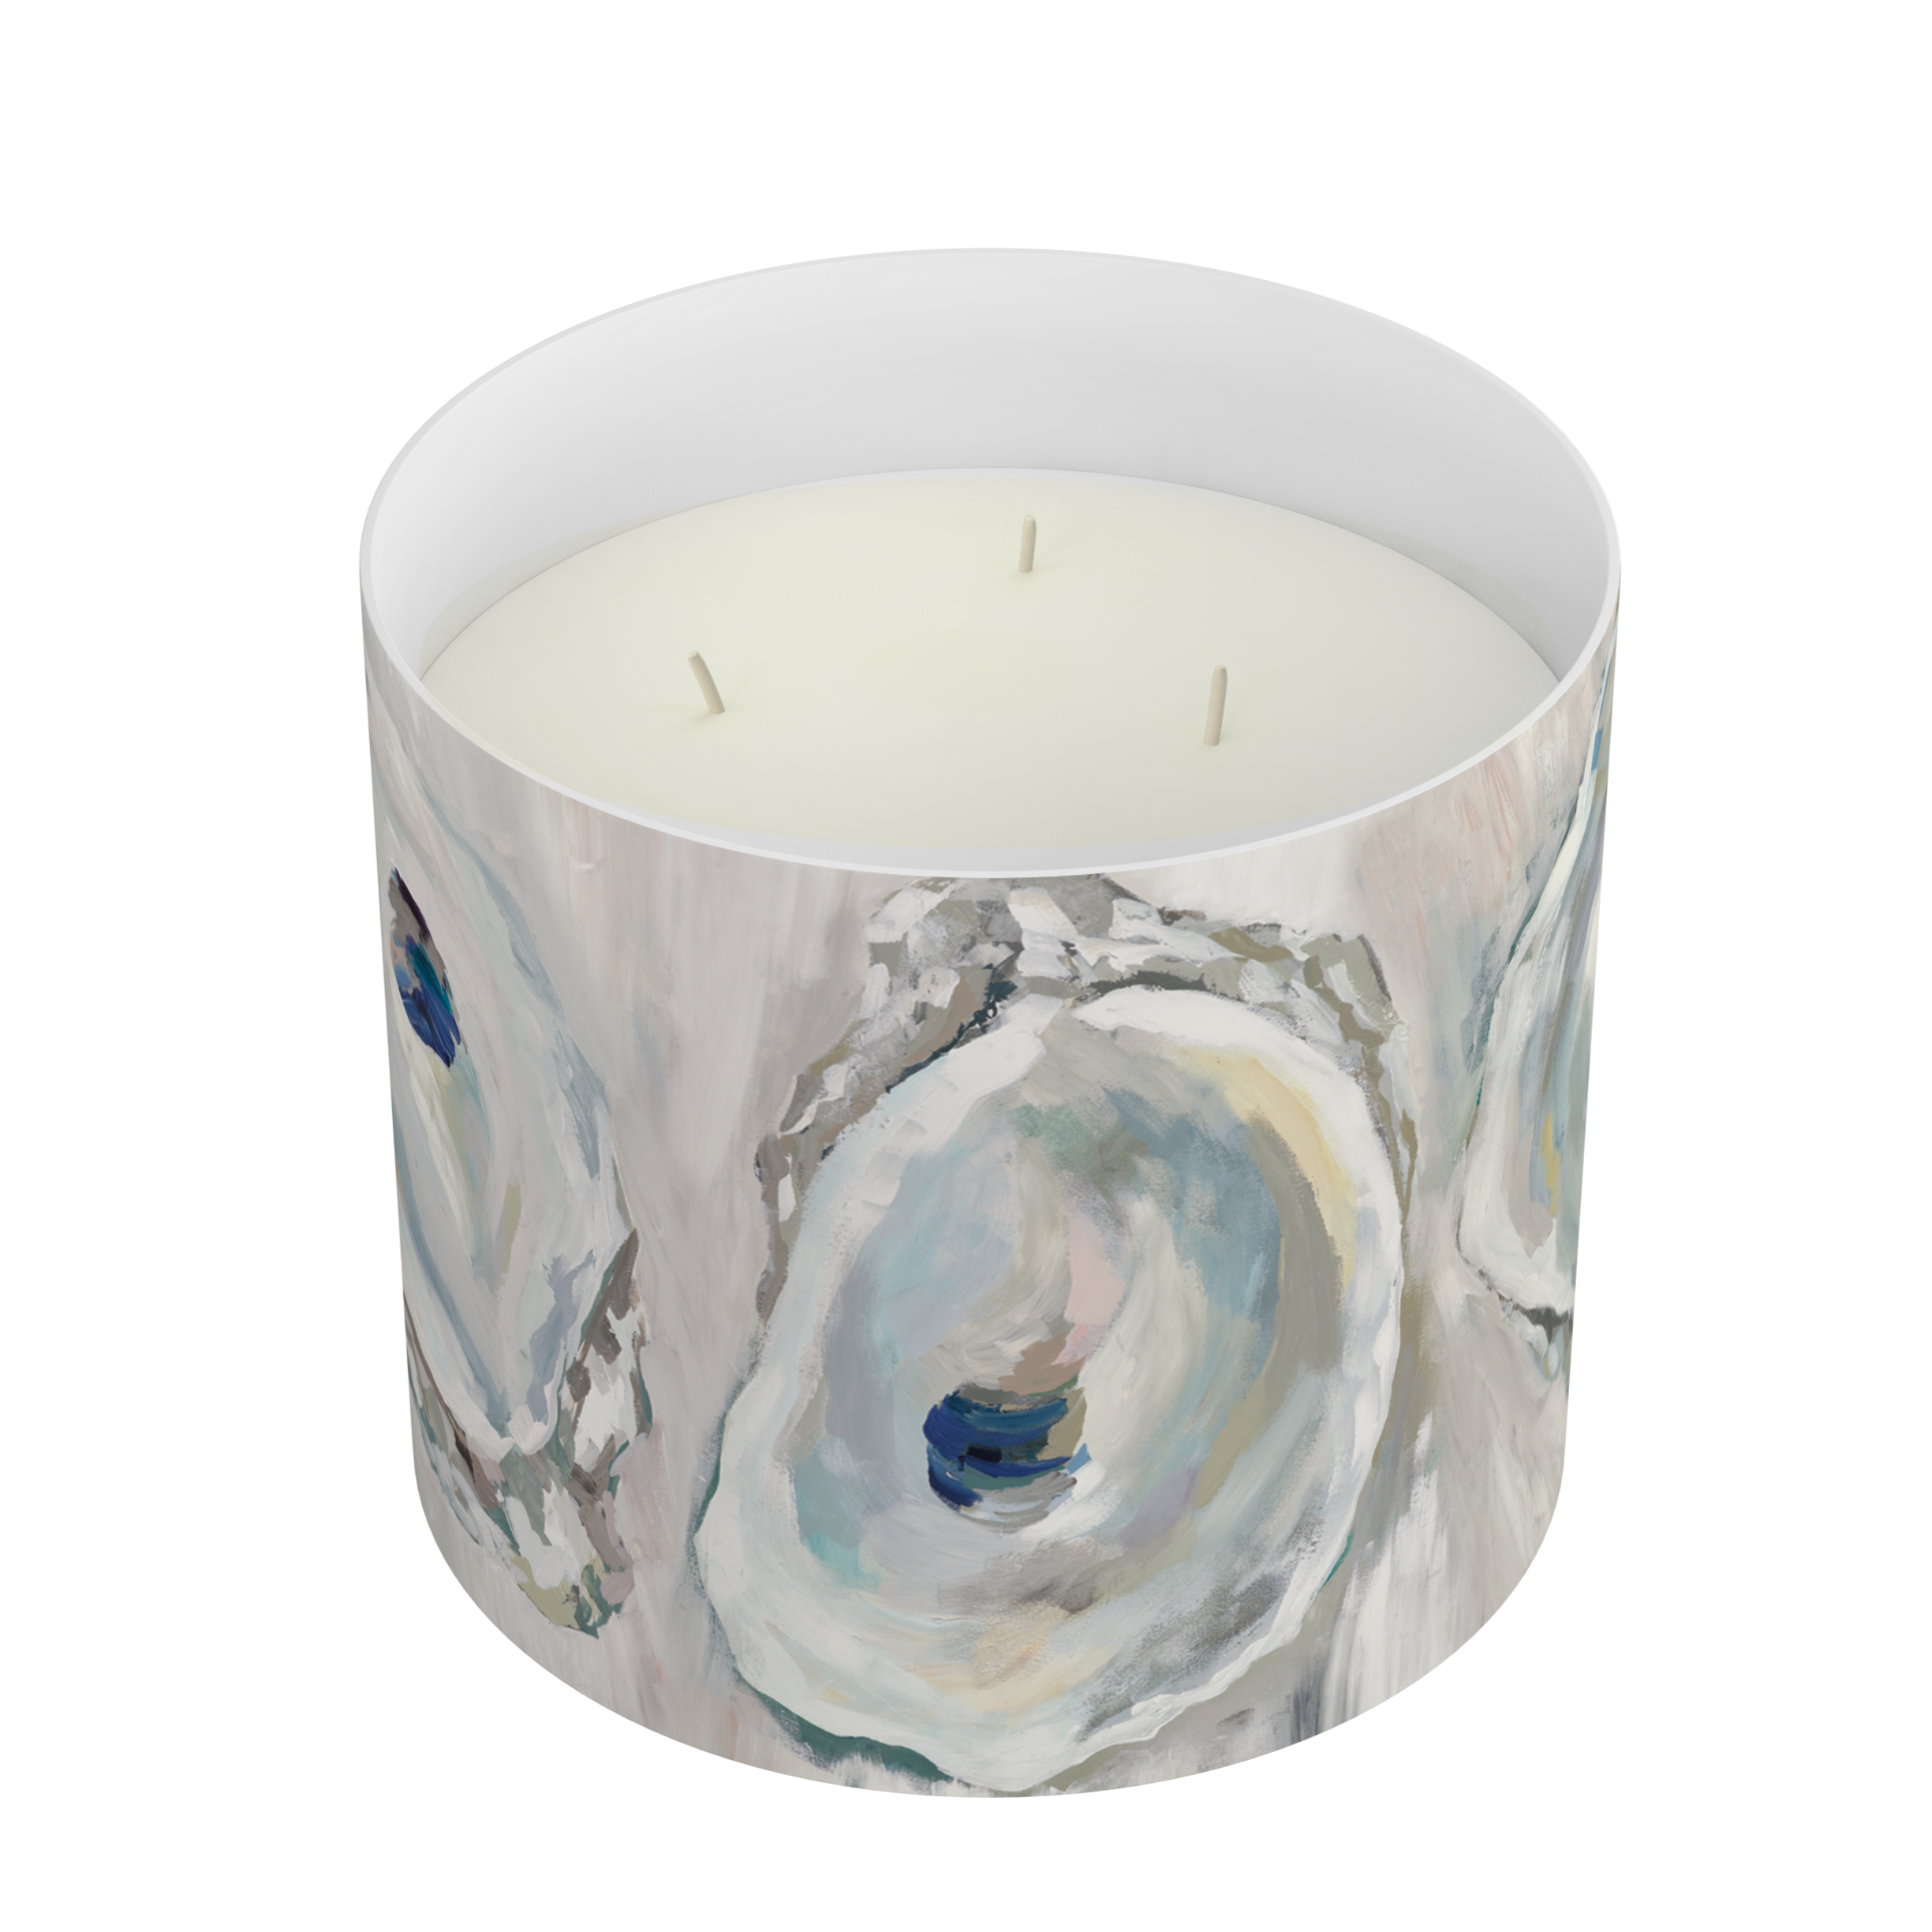 3-Wick Opal Shell Candle front | MILK MONEY milkmoney.co | white elephant gift ideas, gift, mother's day gift ideas, white elephant gift, gift shops near me